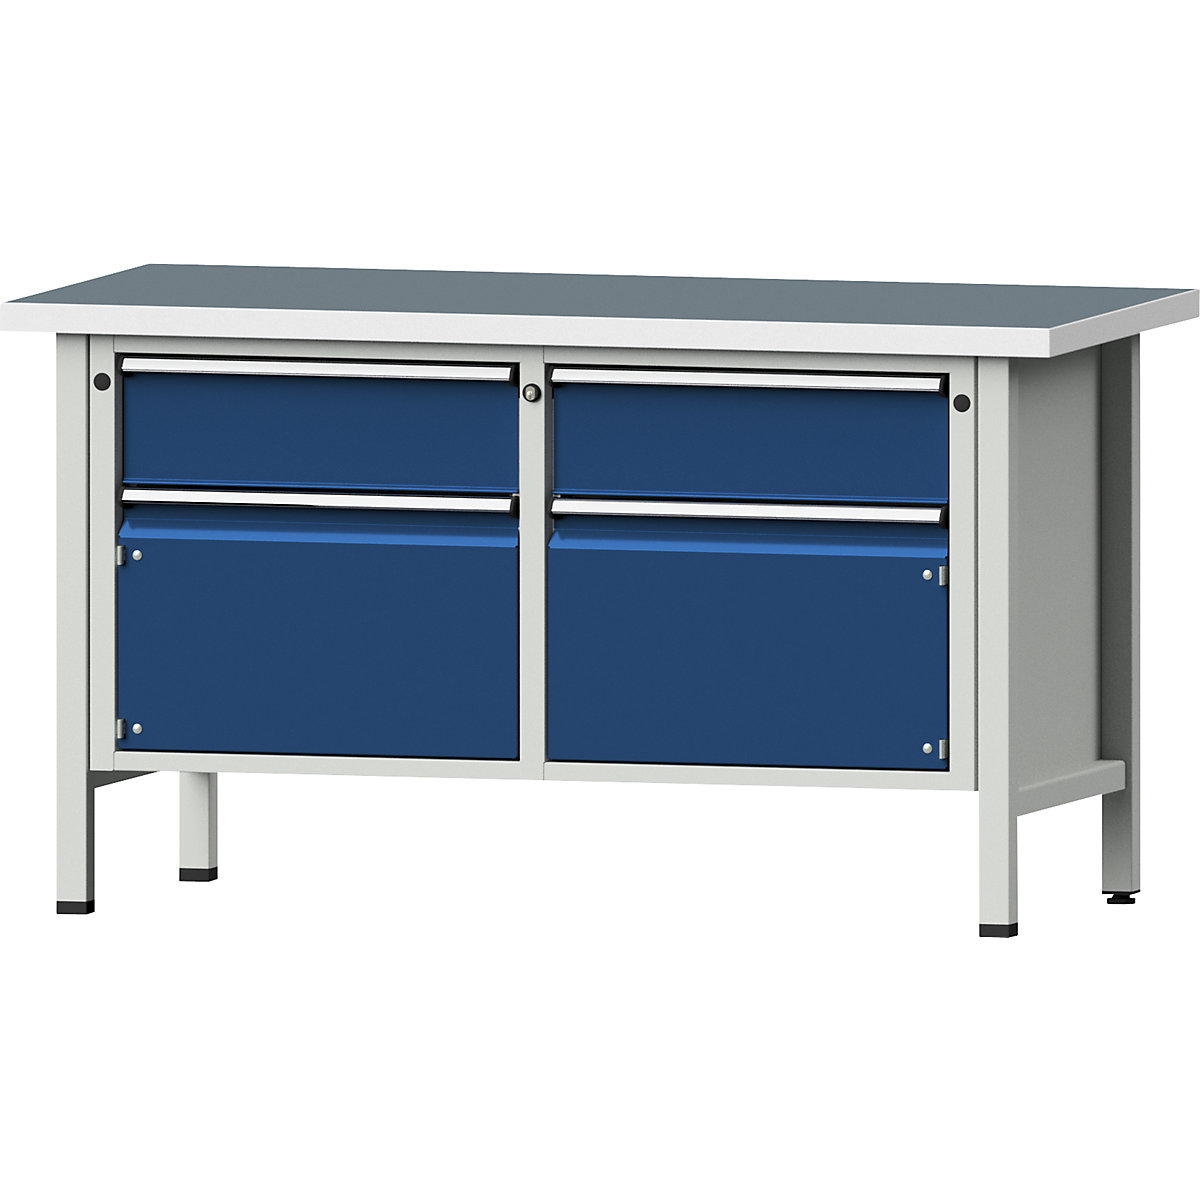 Workbench, frame construction – ANKE, 2 drawers, 2 doors, universal worktop, partial extension-10